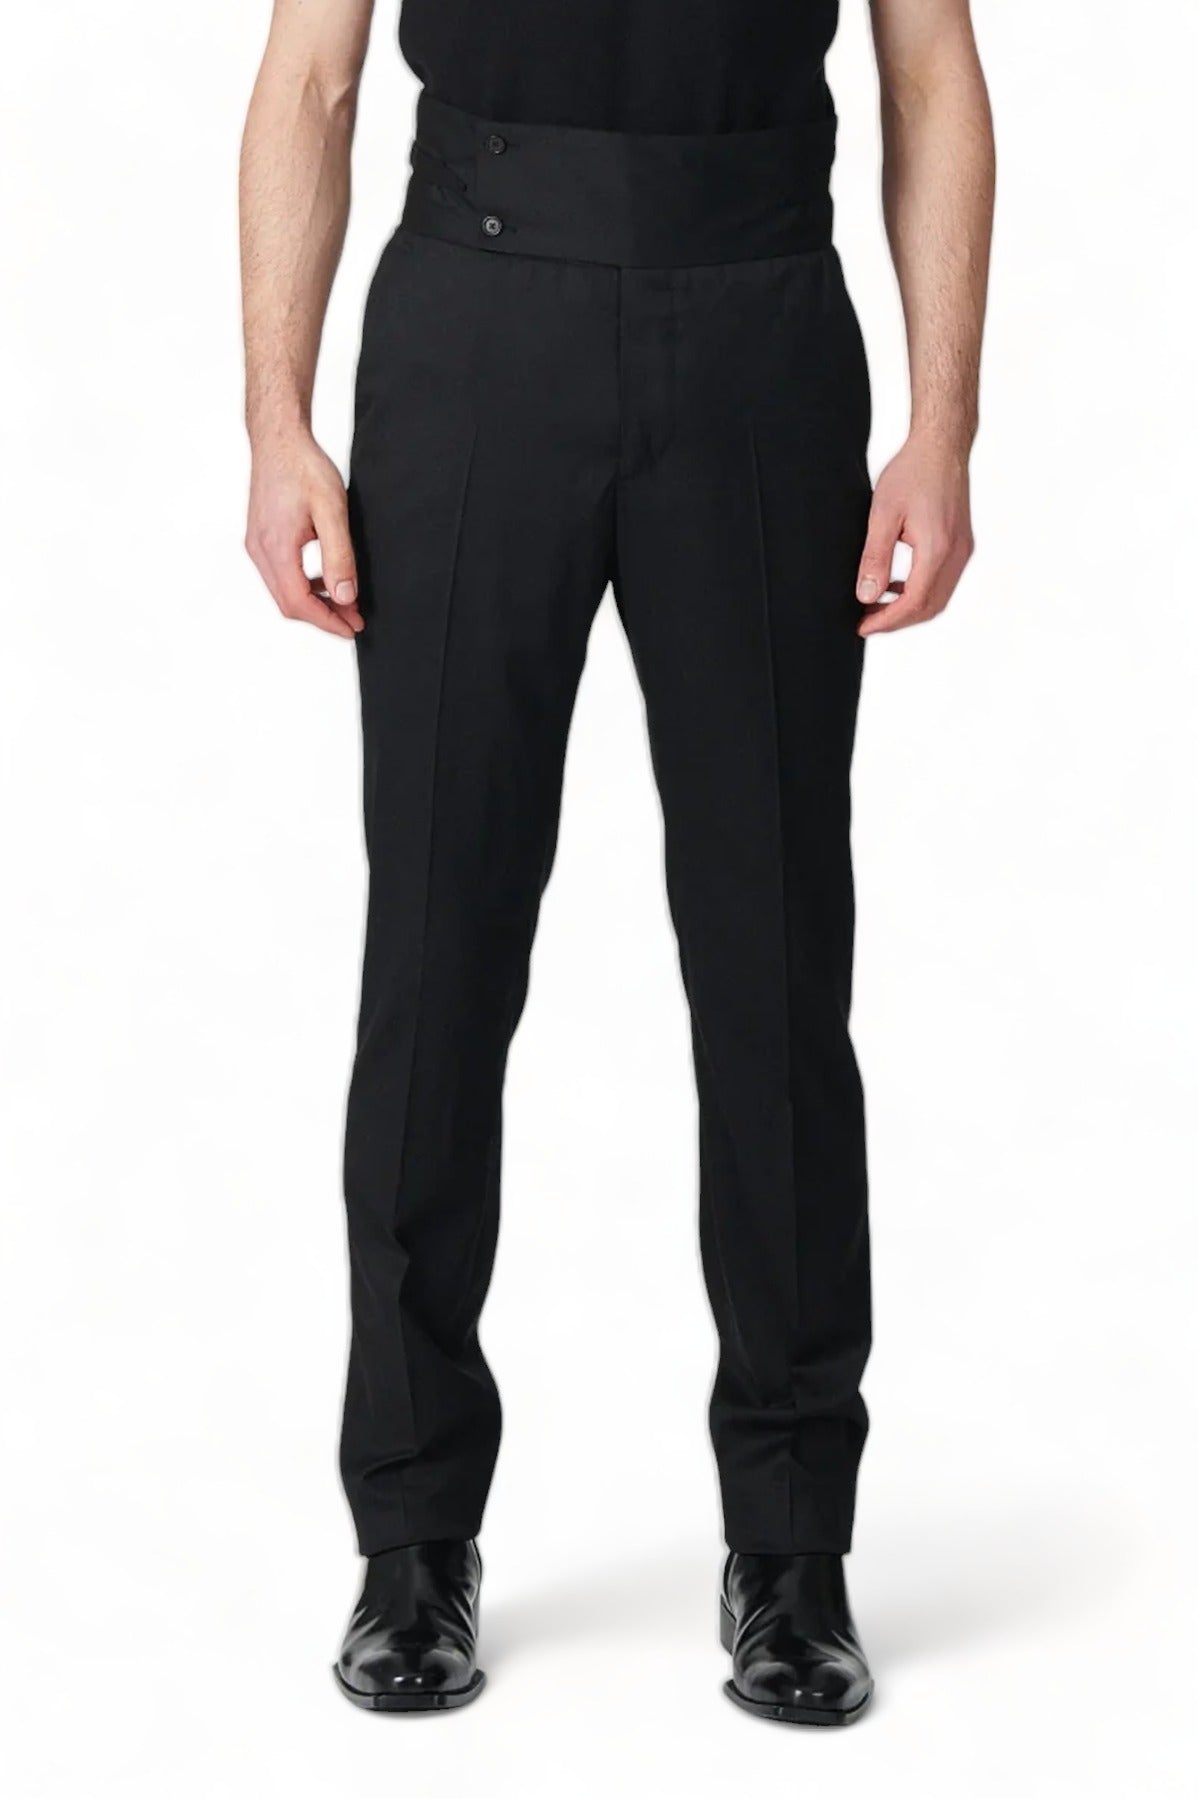 Mercader PADDED TROUSERS - Cargo trousers - black 